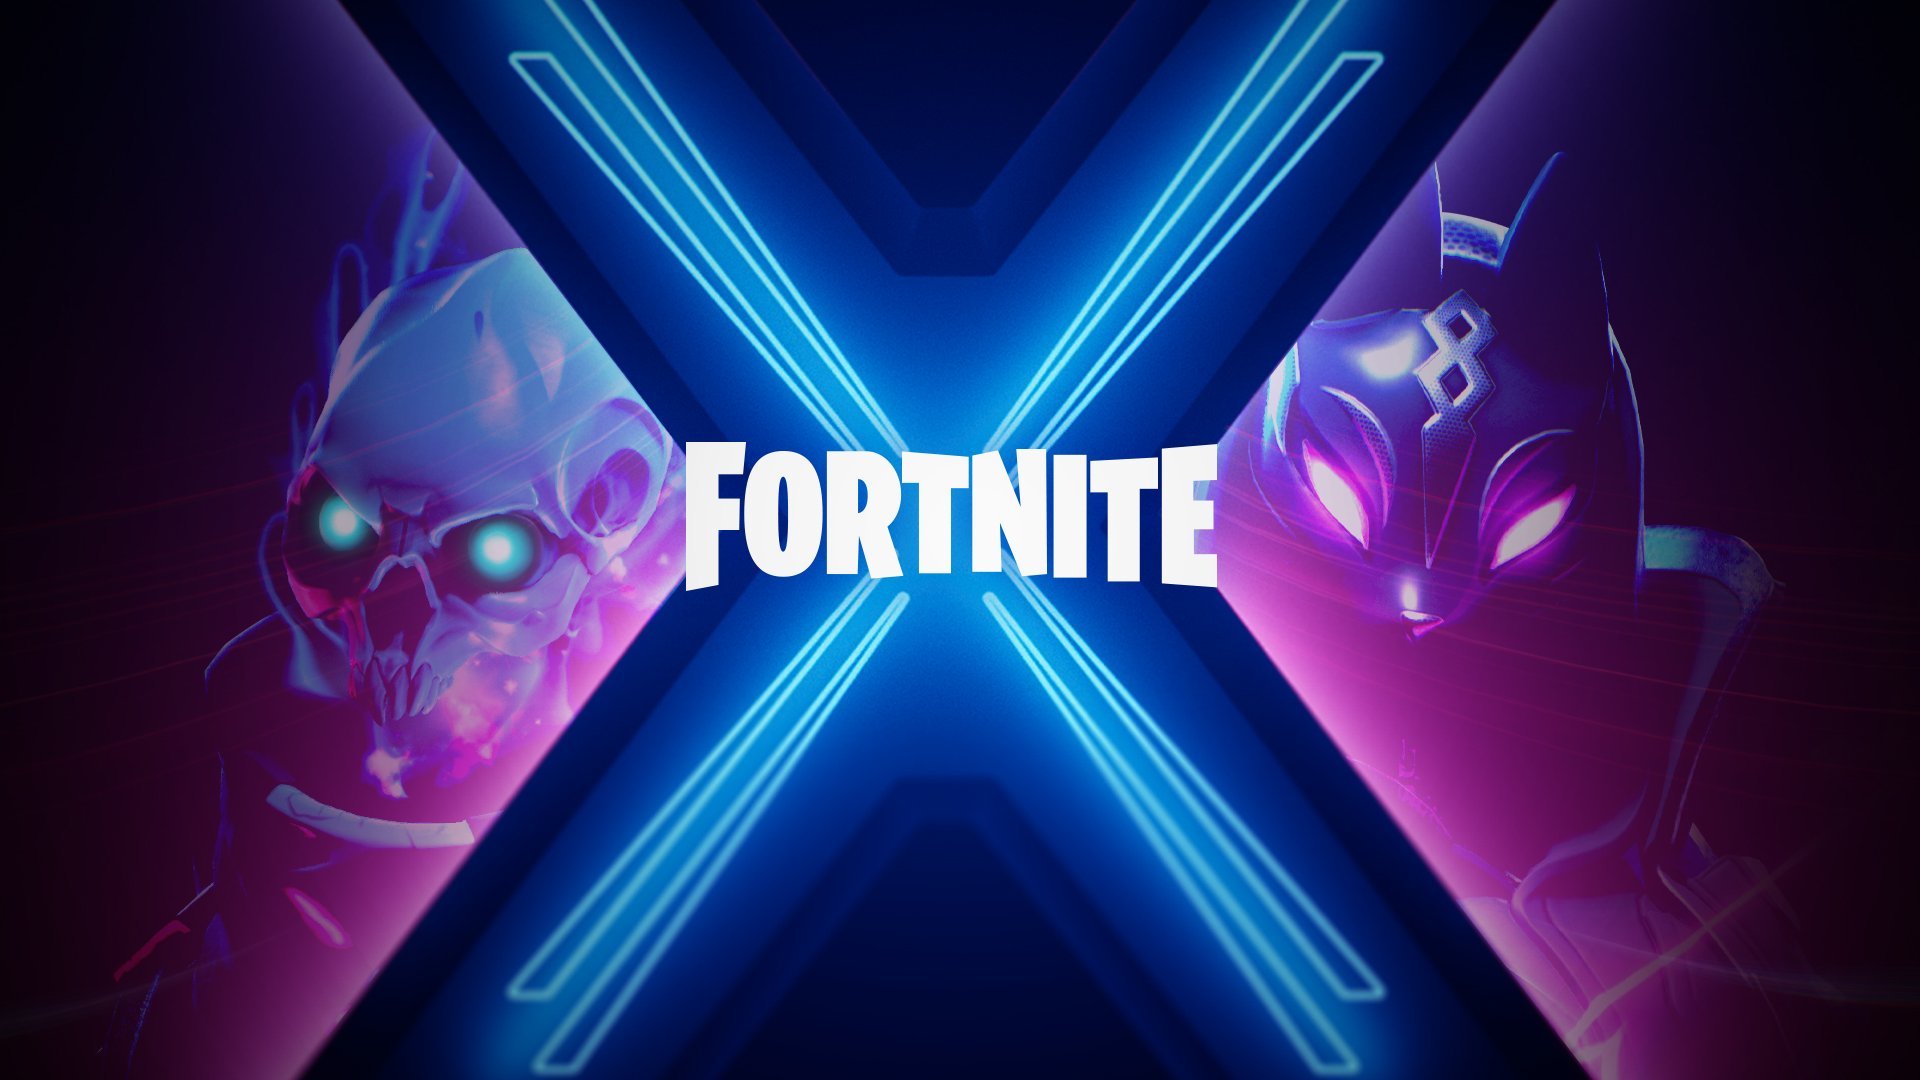 New Fortnite Season Teaser Image Hints At Another Returning